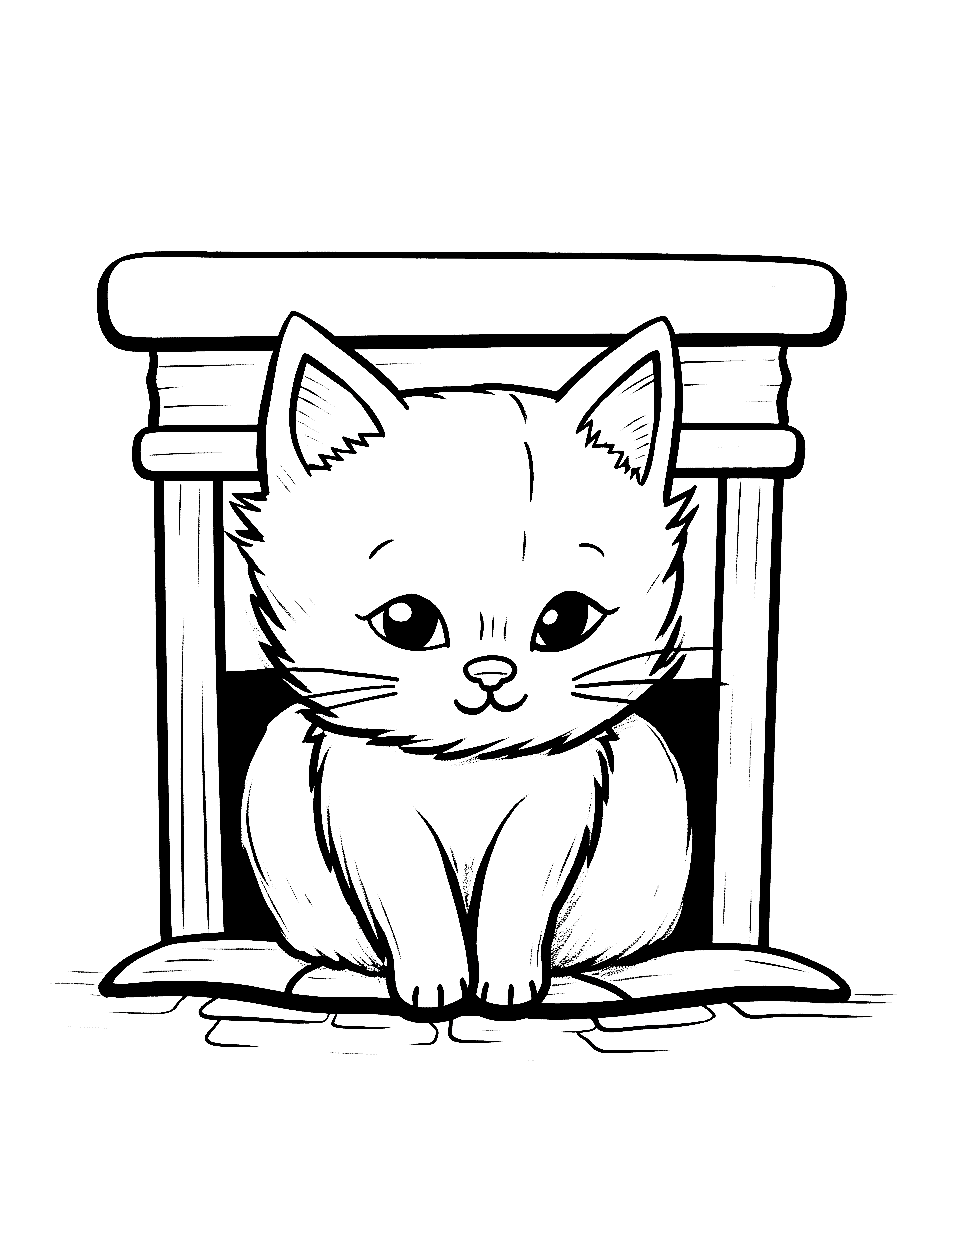 Kitten's Warm Hearth Kitten Coloring Page - A kitten curled up in front of a fireplace.